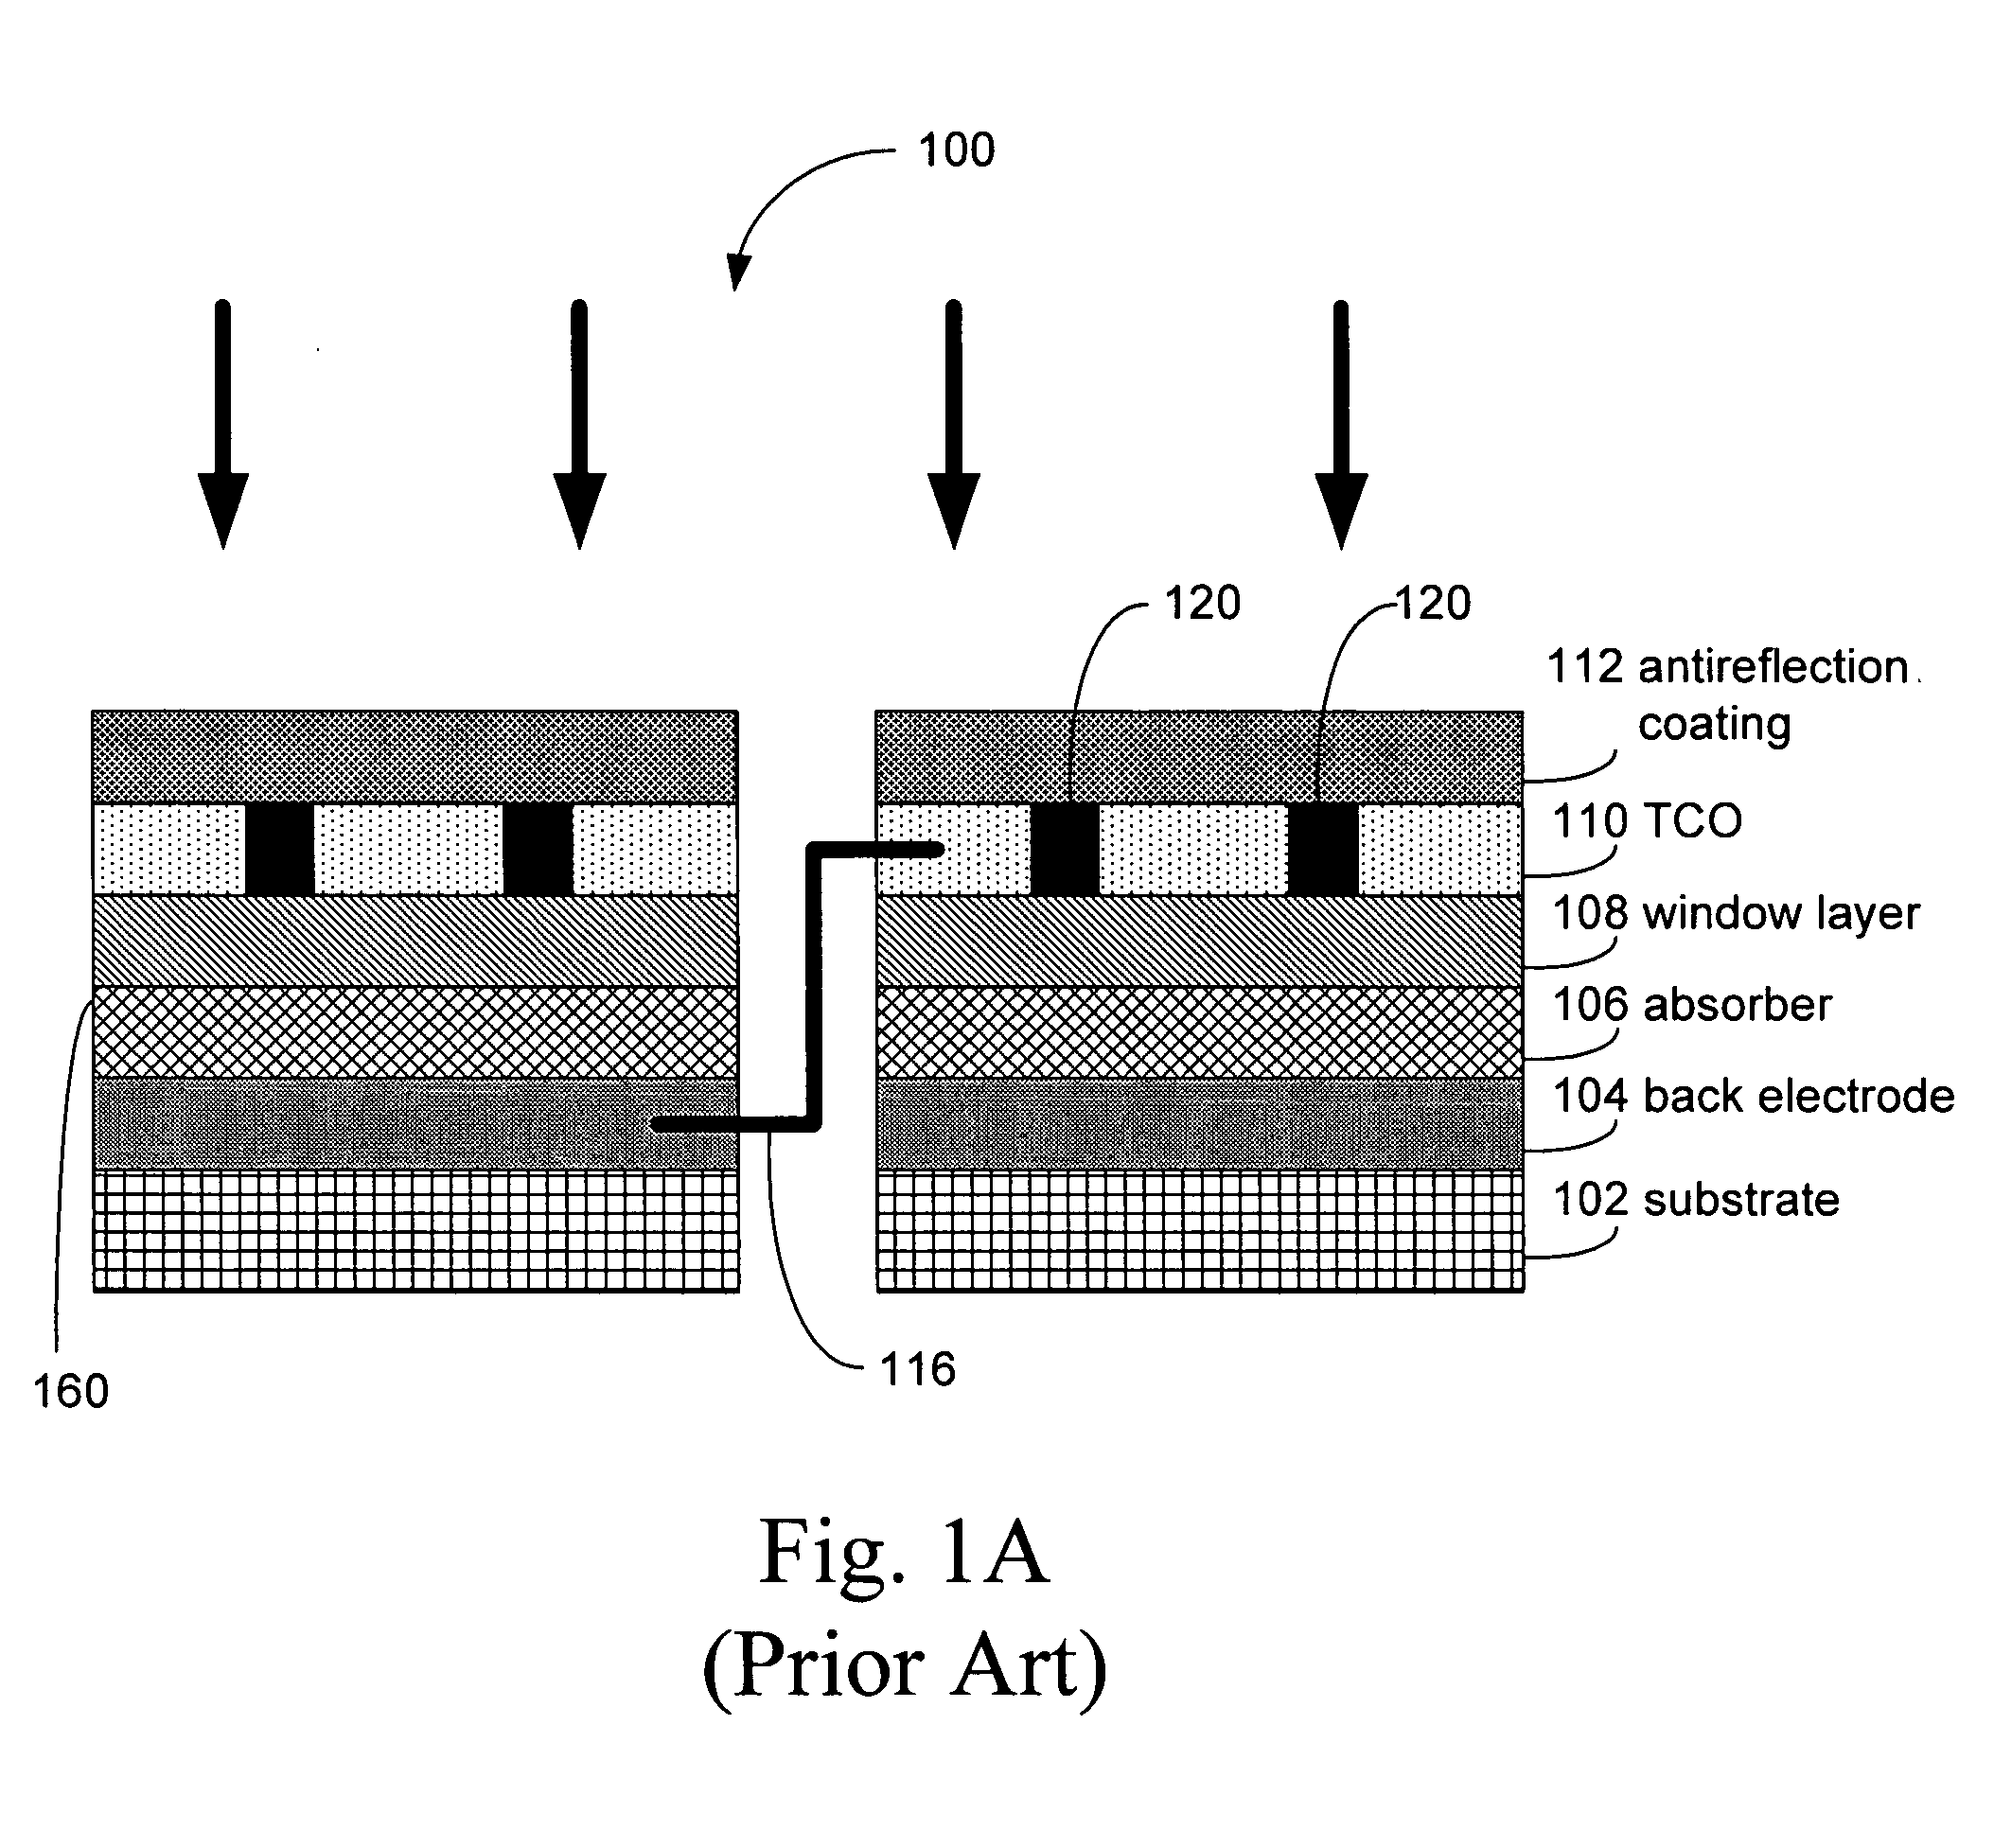 Laser scribing apparatus, systems, and methods